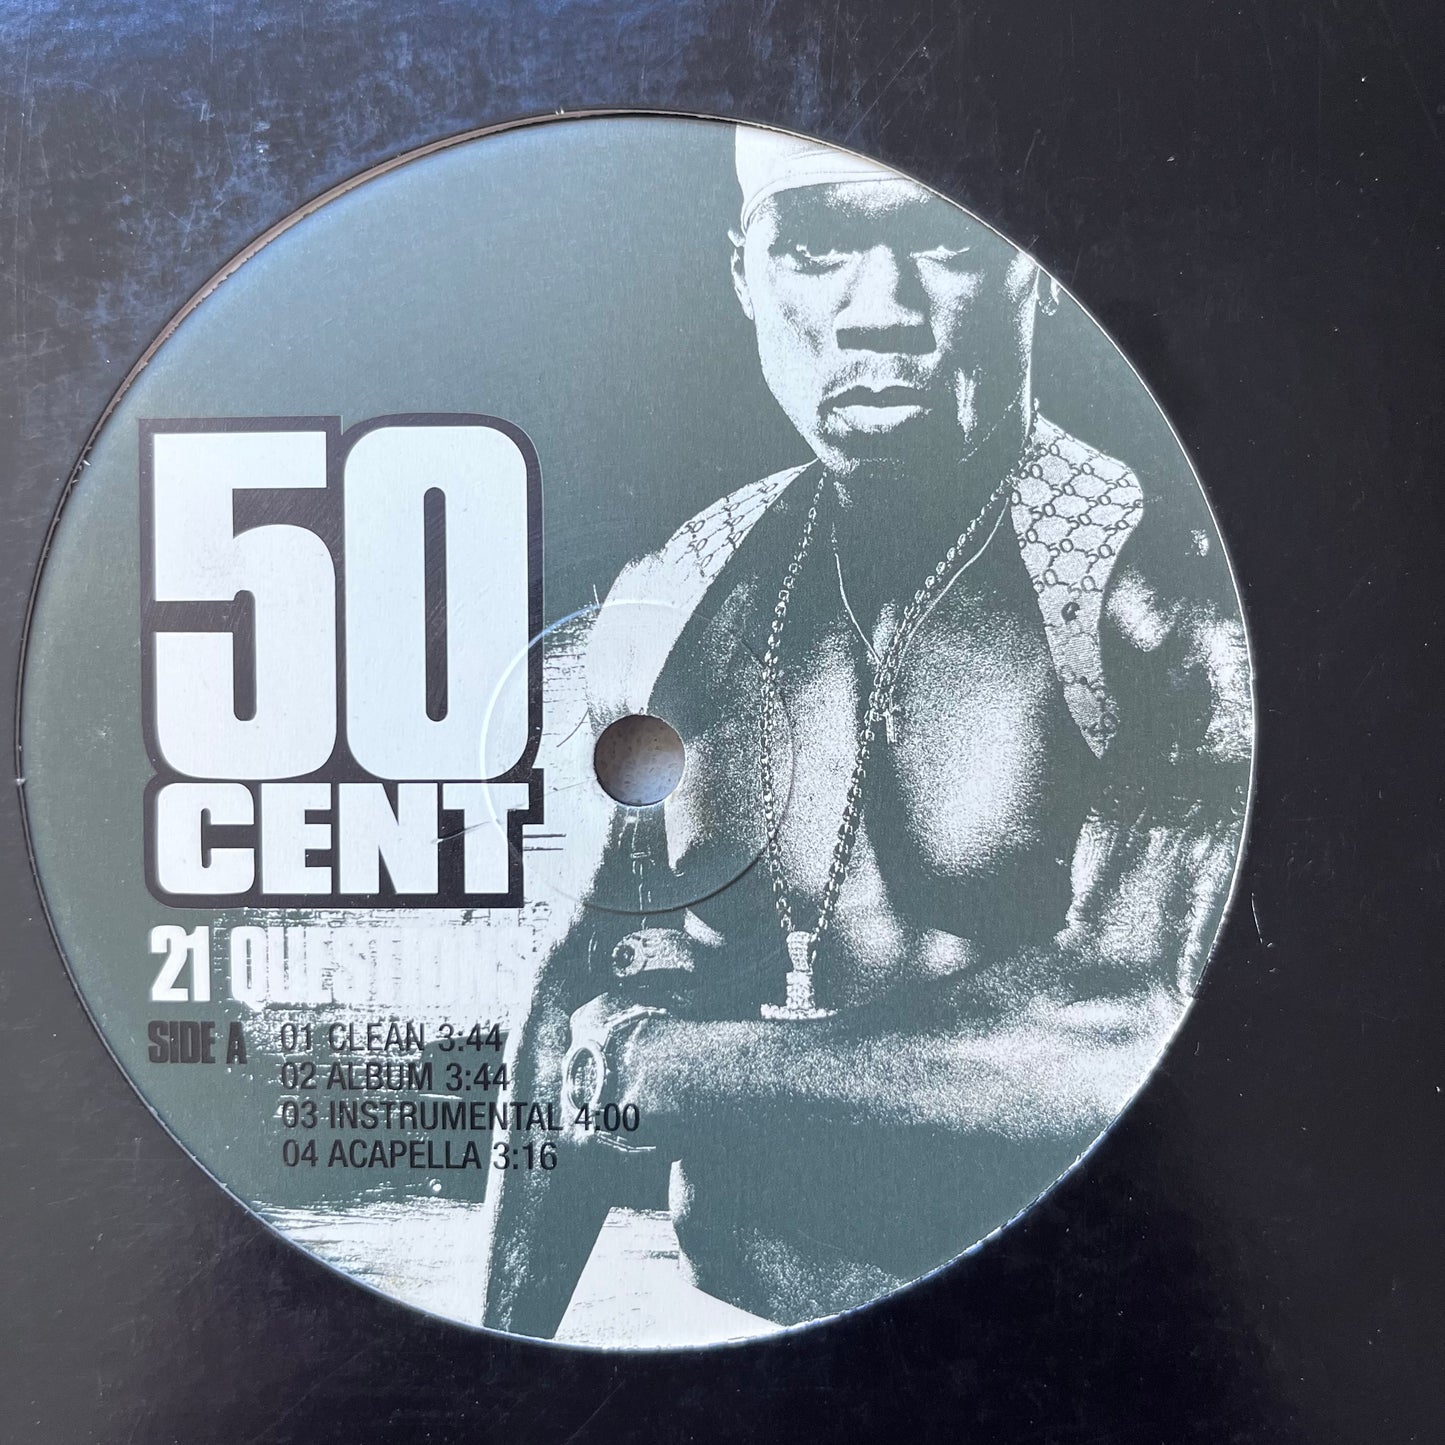 50 Cent “21 Questions” 4 Track 12inch Vinyl